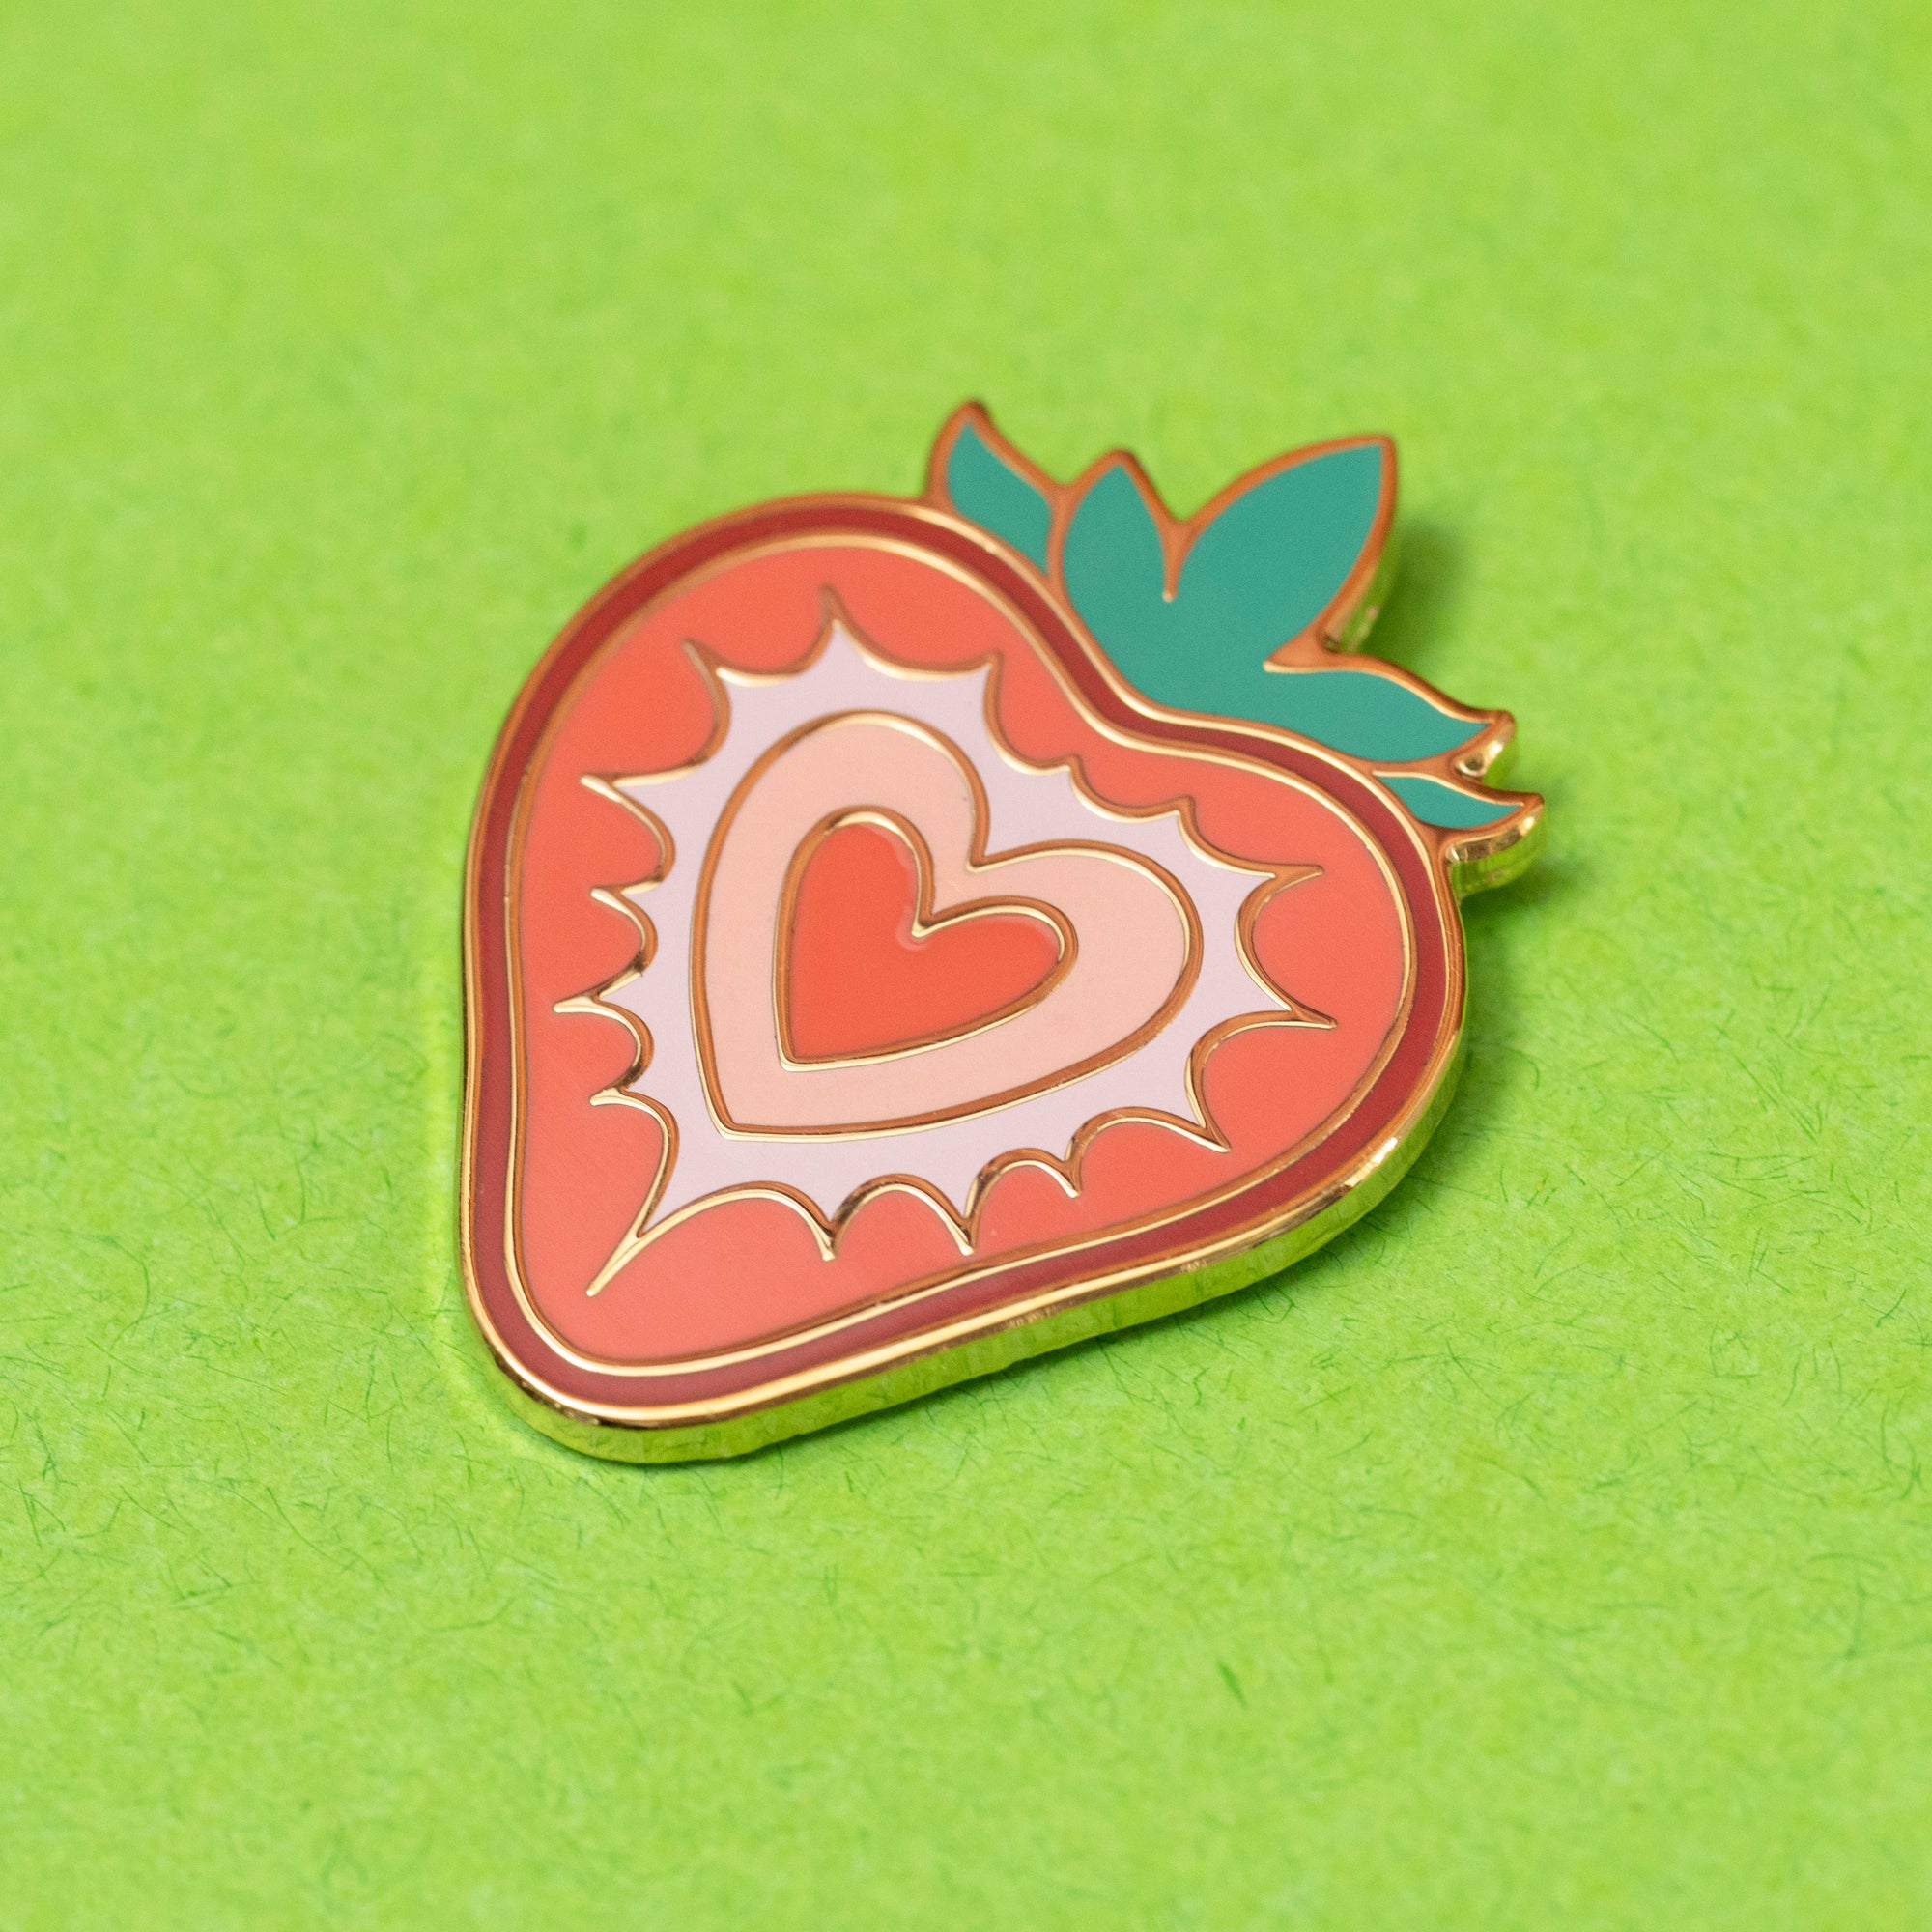 I love you Berry much Enamel Pin